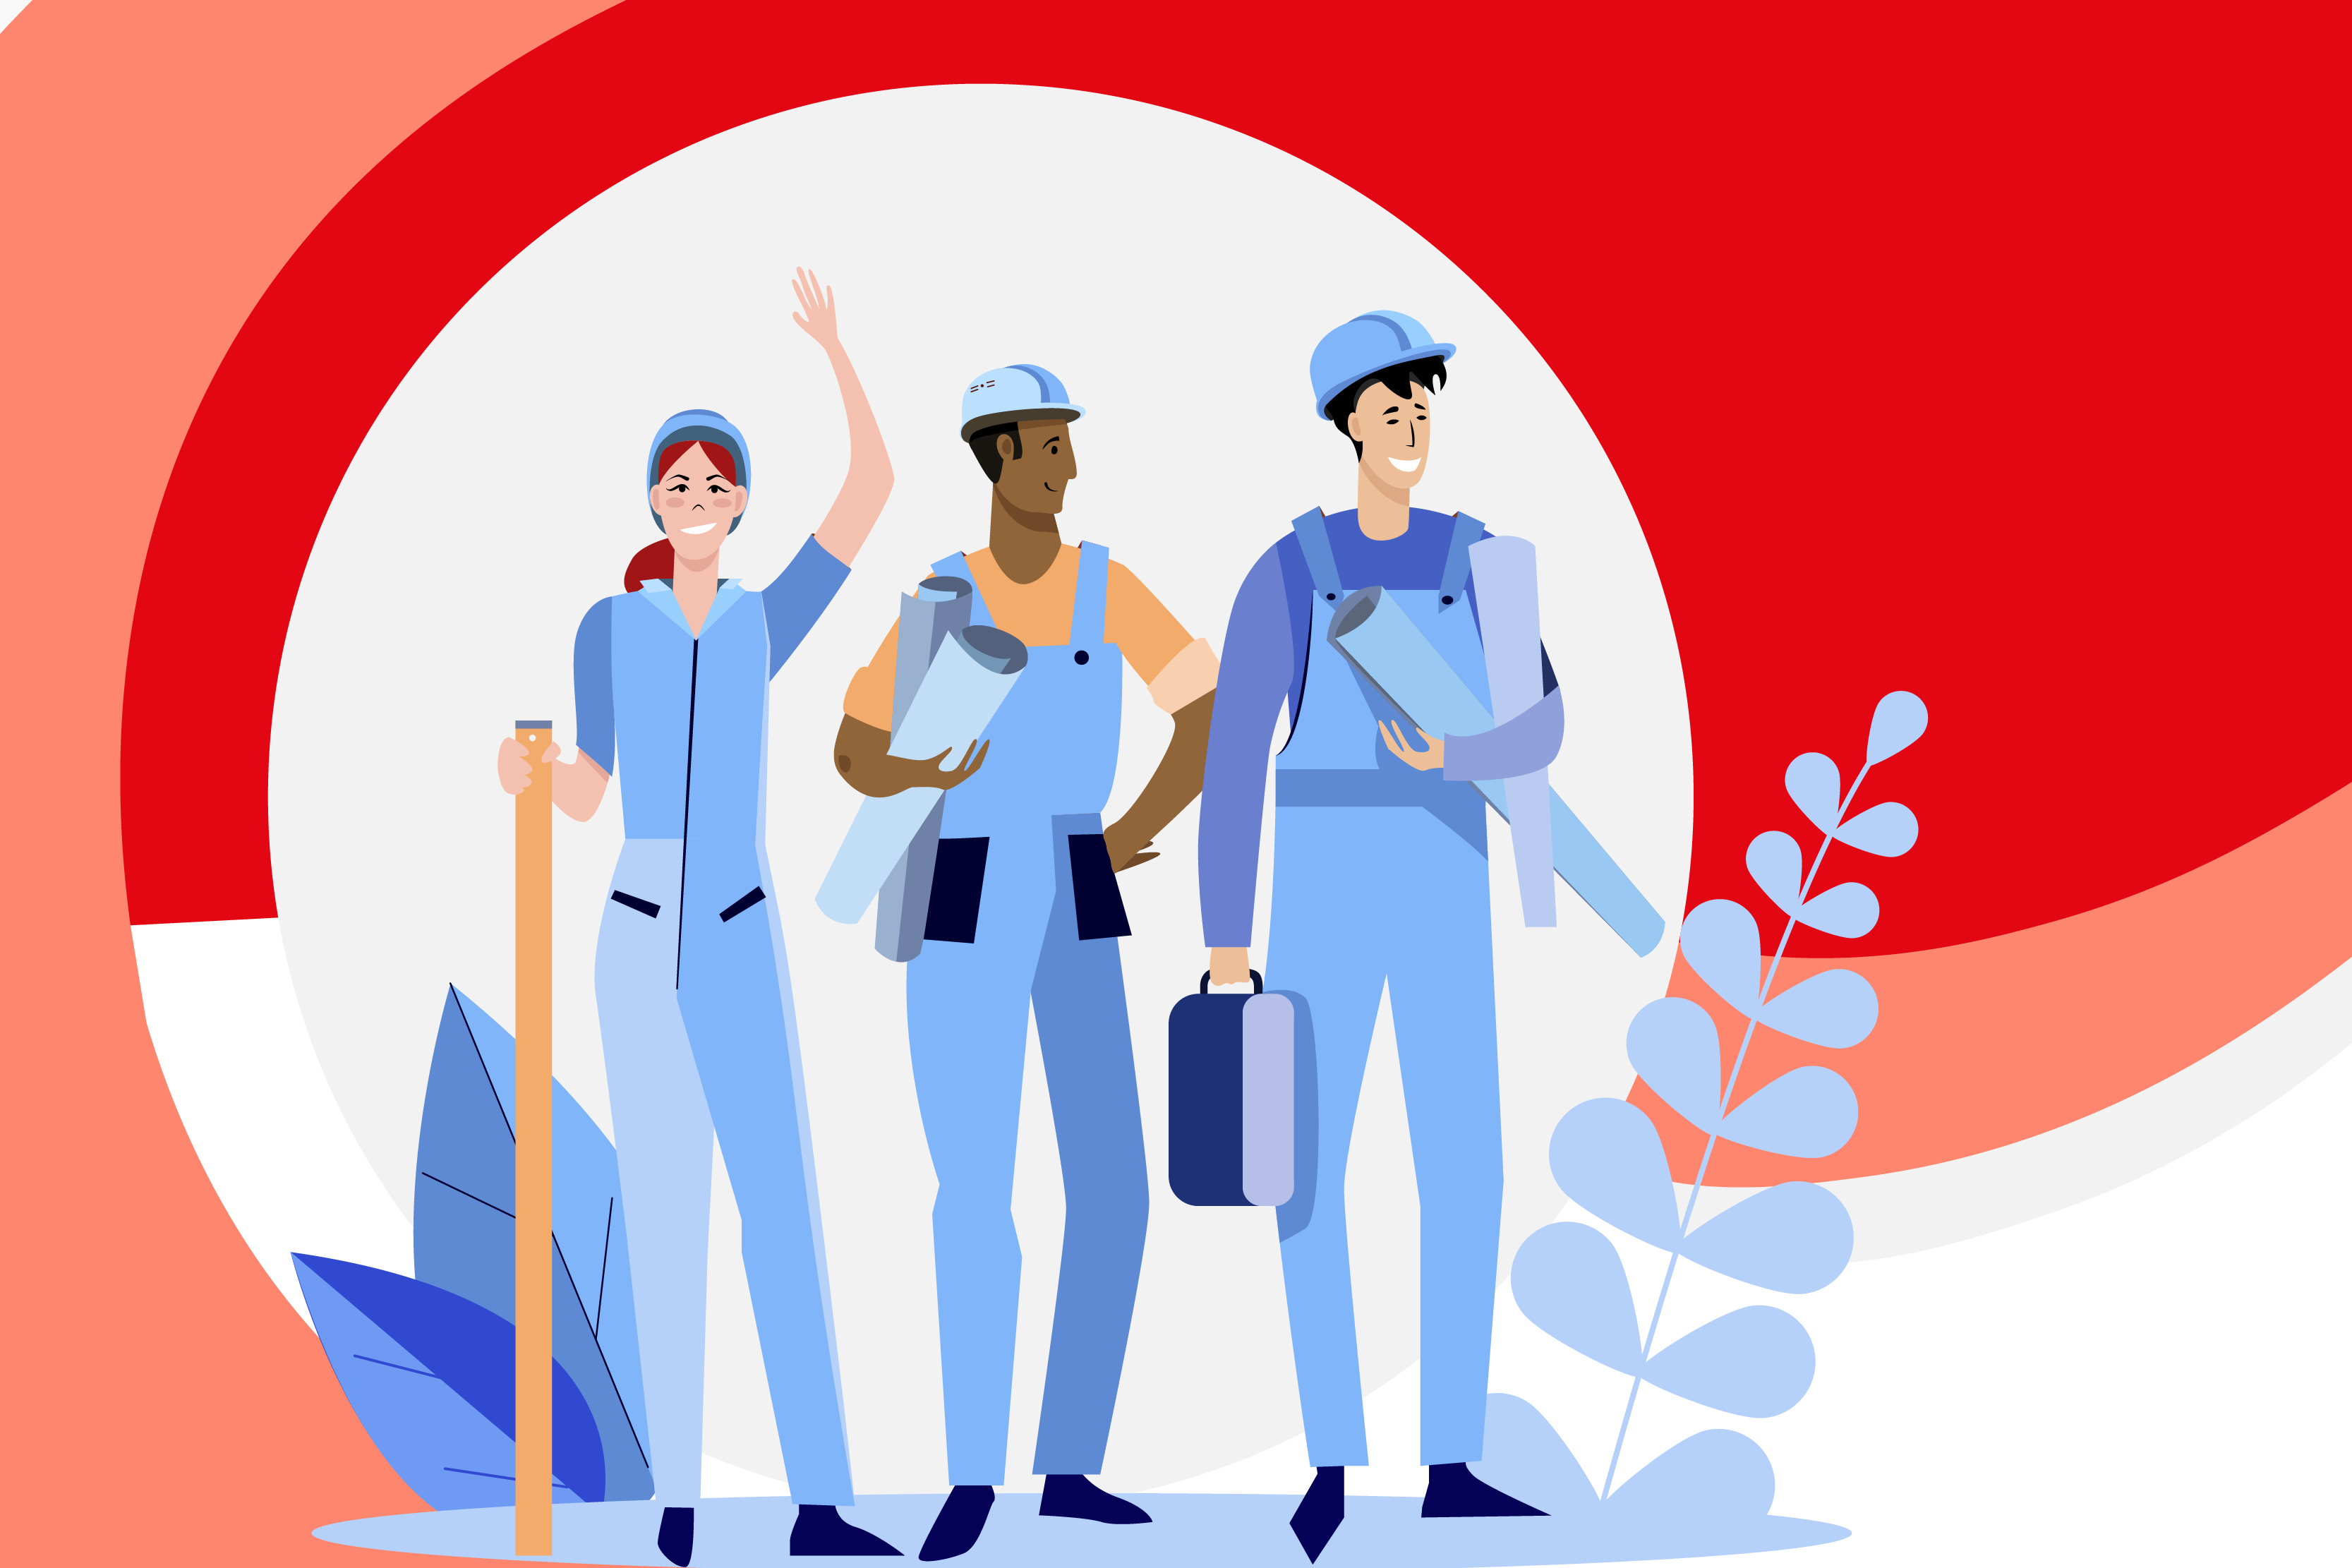 Illustration Comicstyle: One female worker and two male blue collar workers are waving with their hands